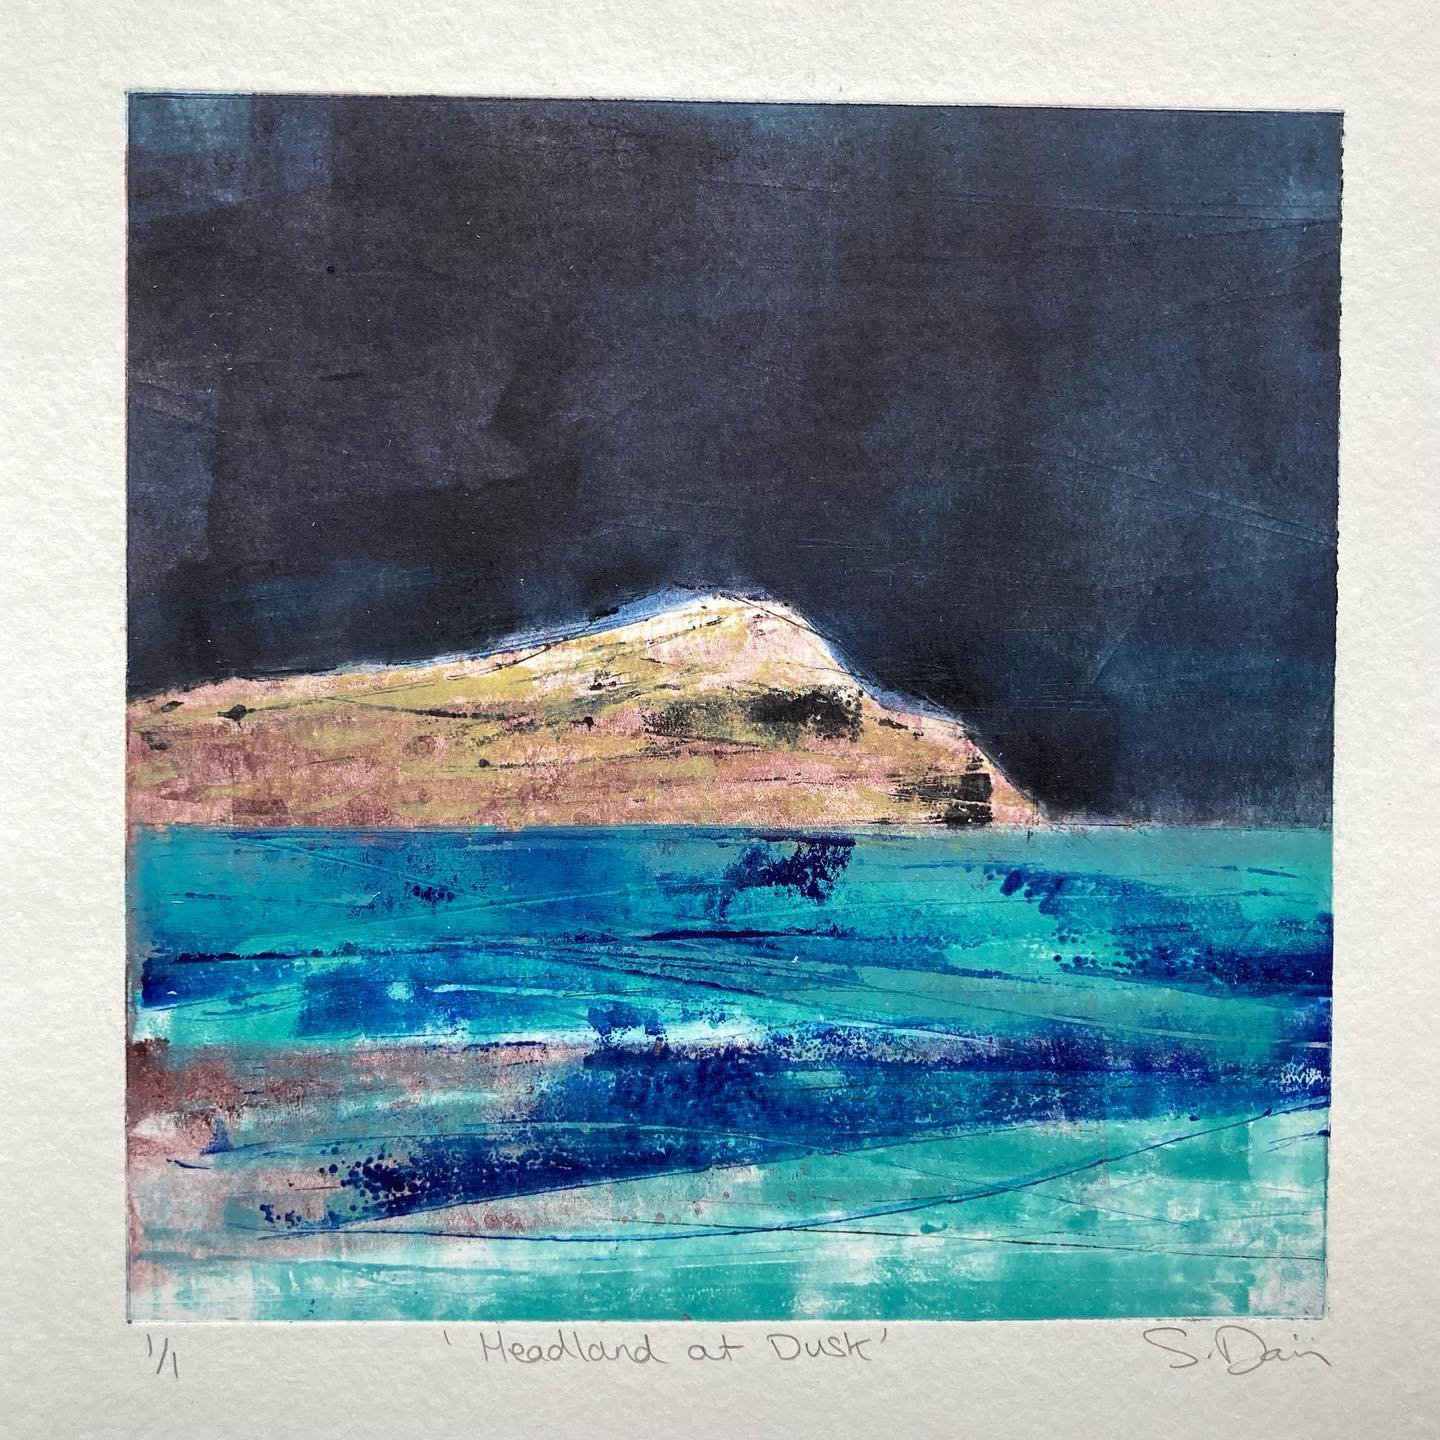 This little monotype print will be on display @bathartistprintmakers in Larkhall this bank holiday weekend as part of open studios @larkhallfestival The studio will be open Saturday till Monday 11-5 each day, so please do drop in for a chat with the 